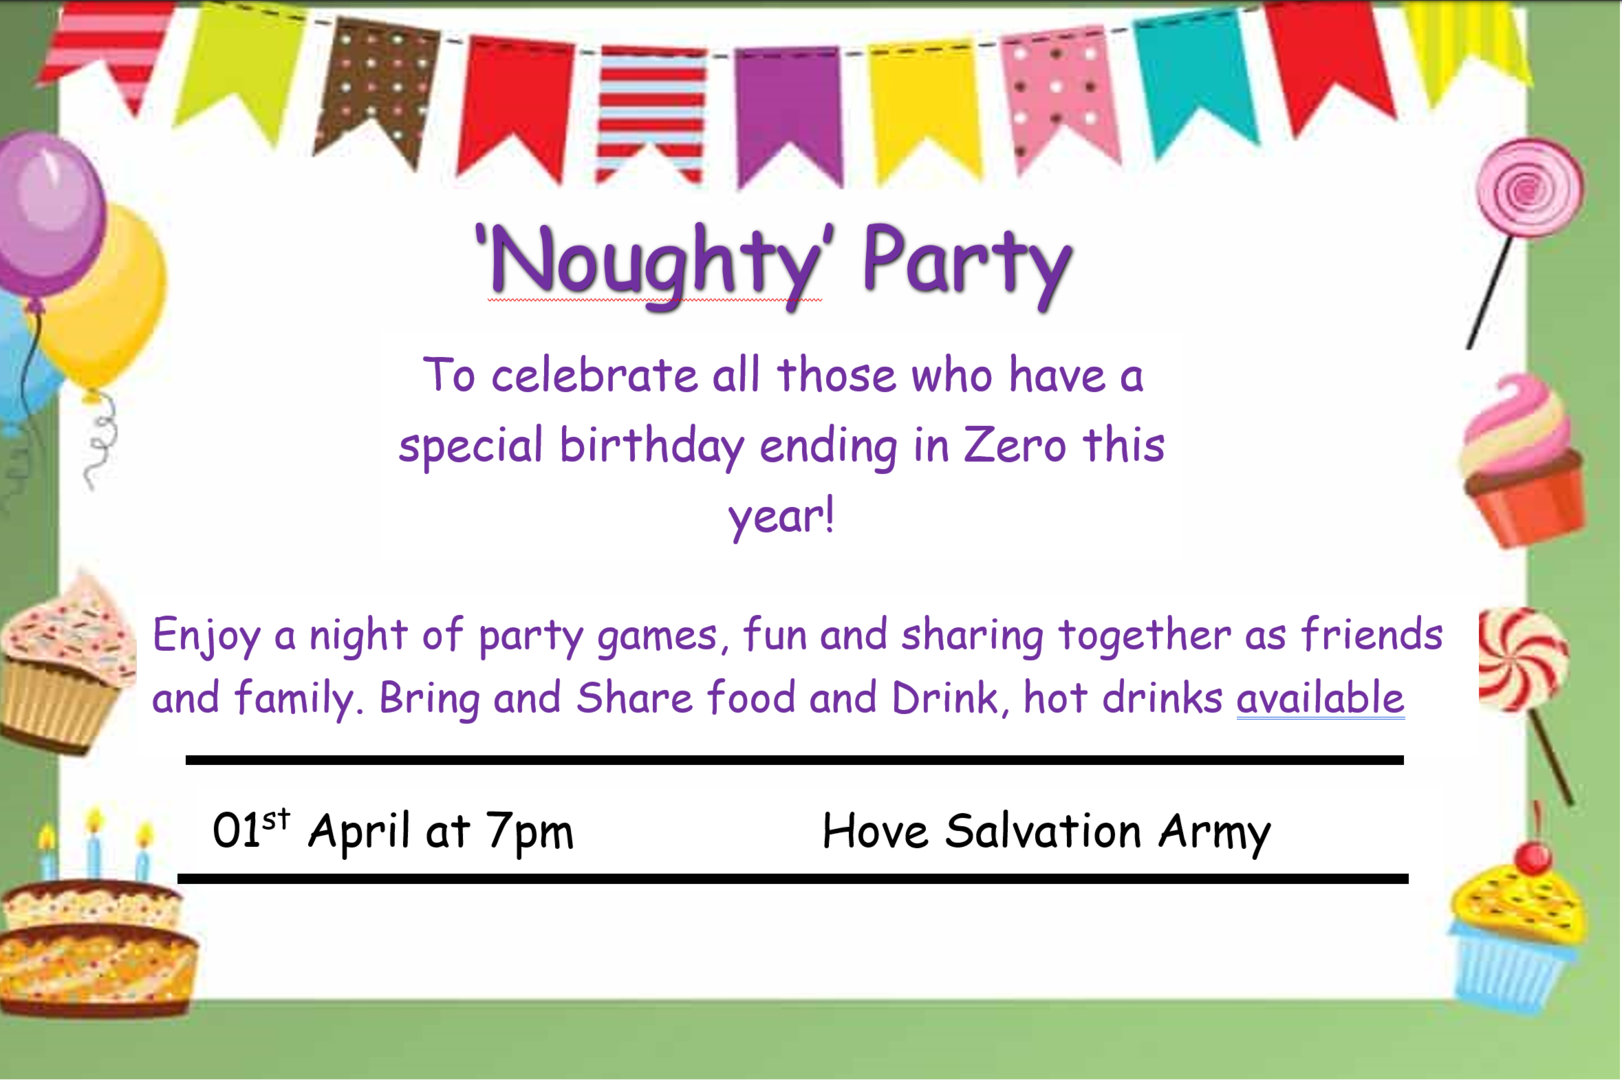 Noughty Party 01 april 7pm Hove Salvation Army